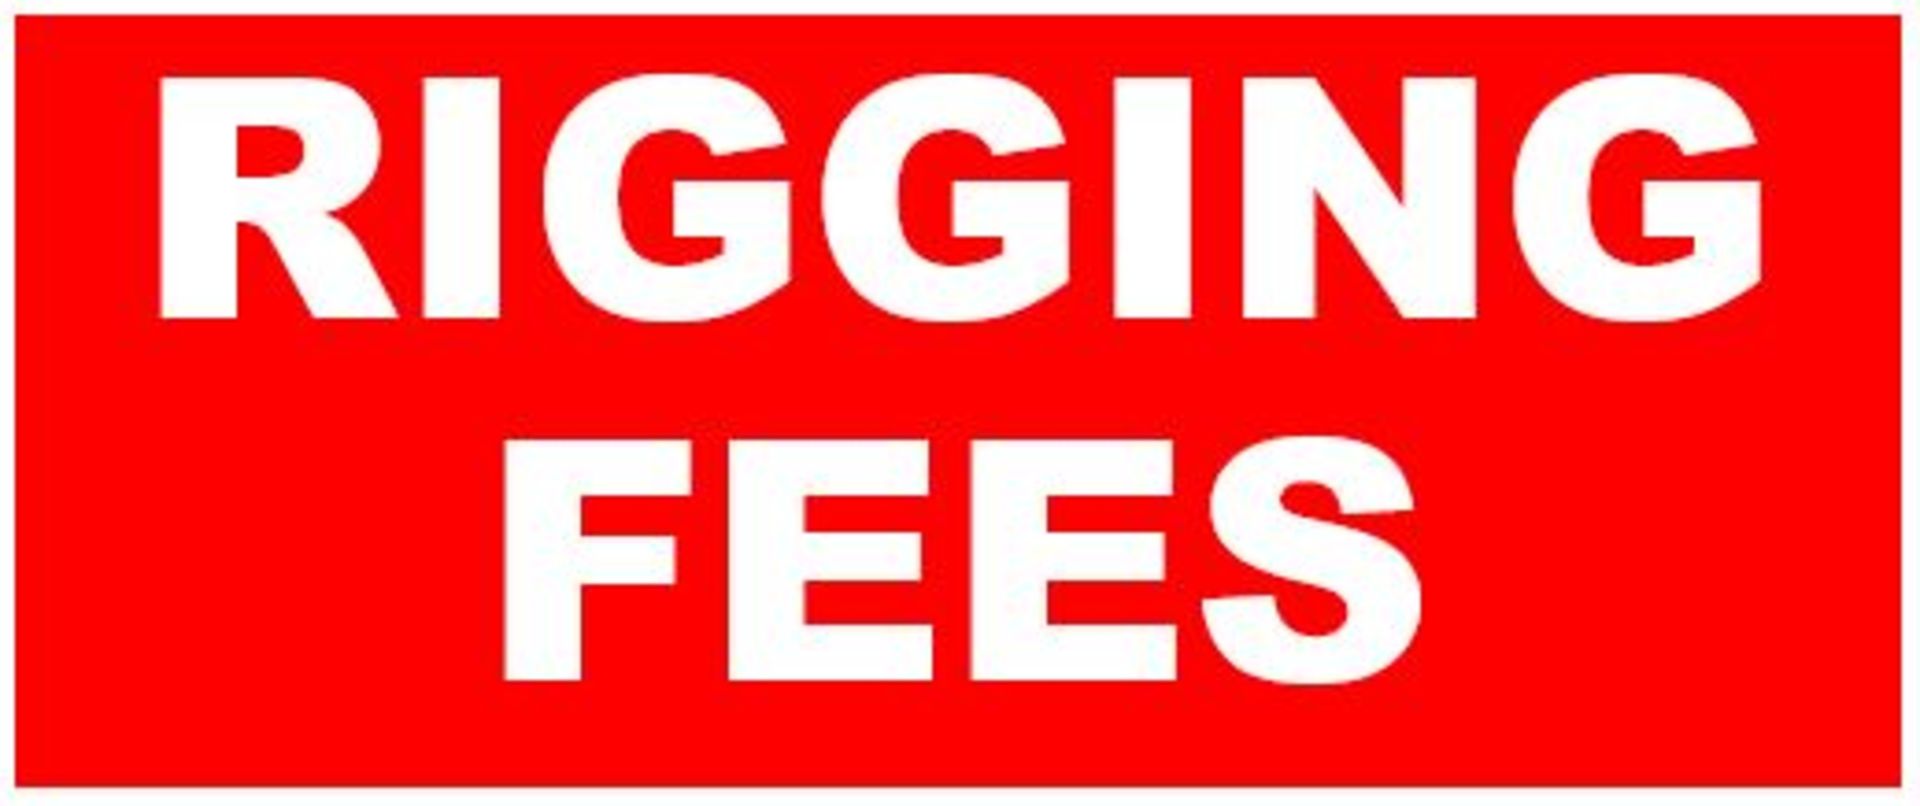 ALL PURCHASERS ARE REQUIRED TO PAY A RIGGING FEE AS LISTED IN THE LOT DESCRIPTION. THESE PRICES ARE